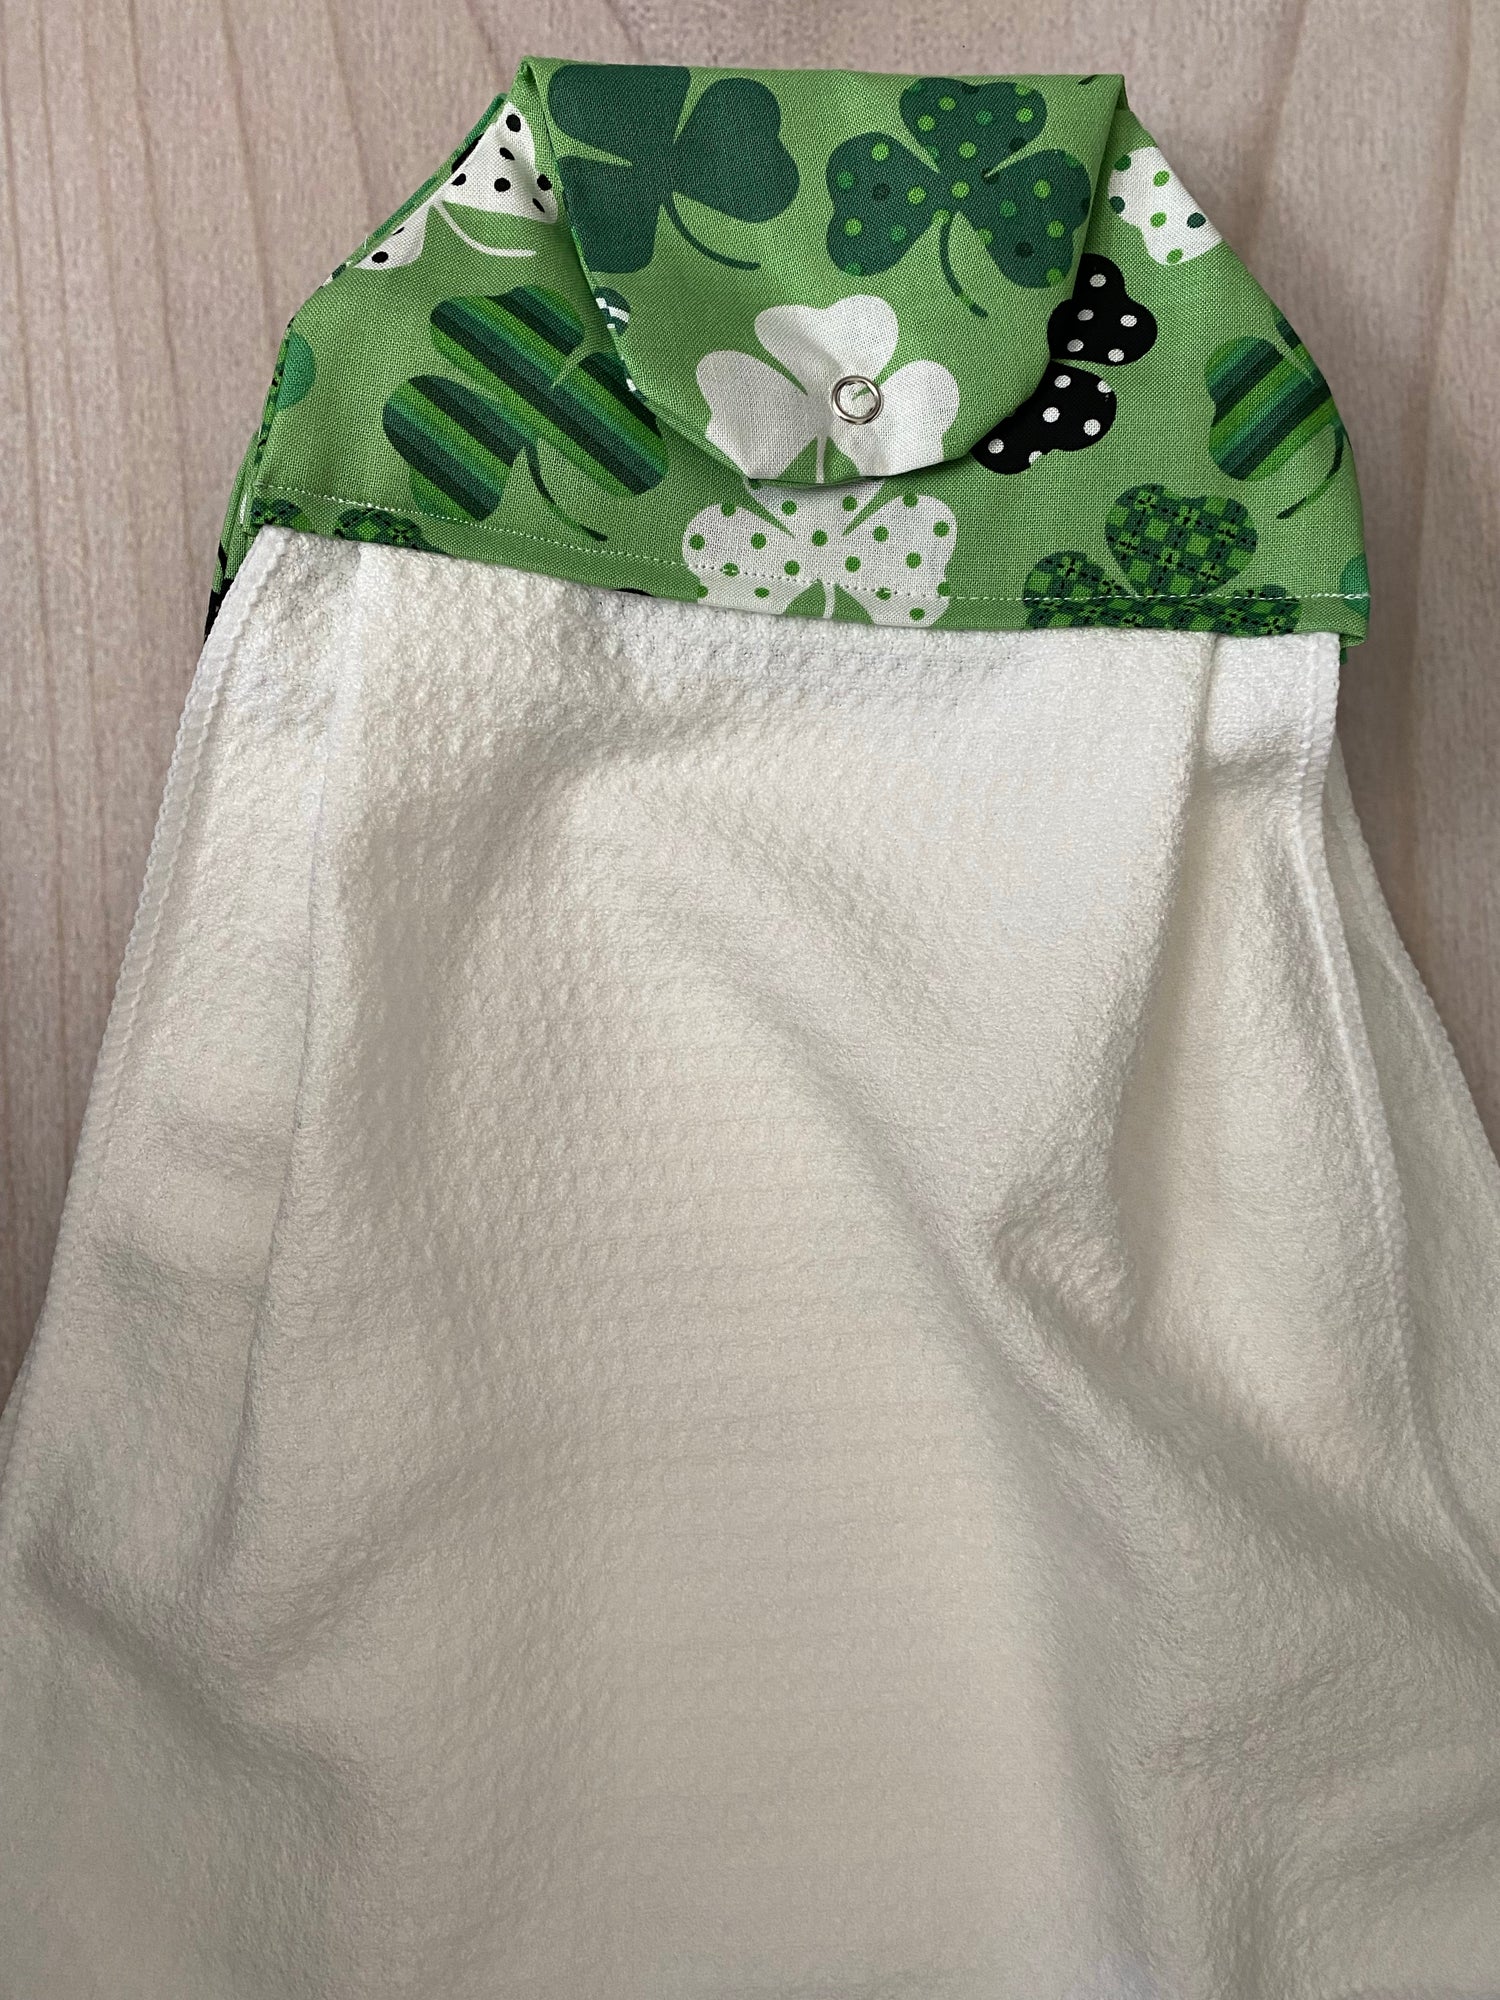 St Patrick’s day towels